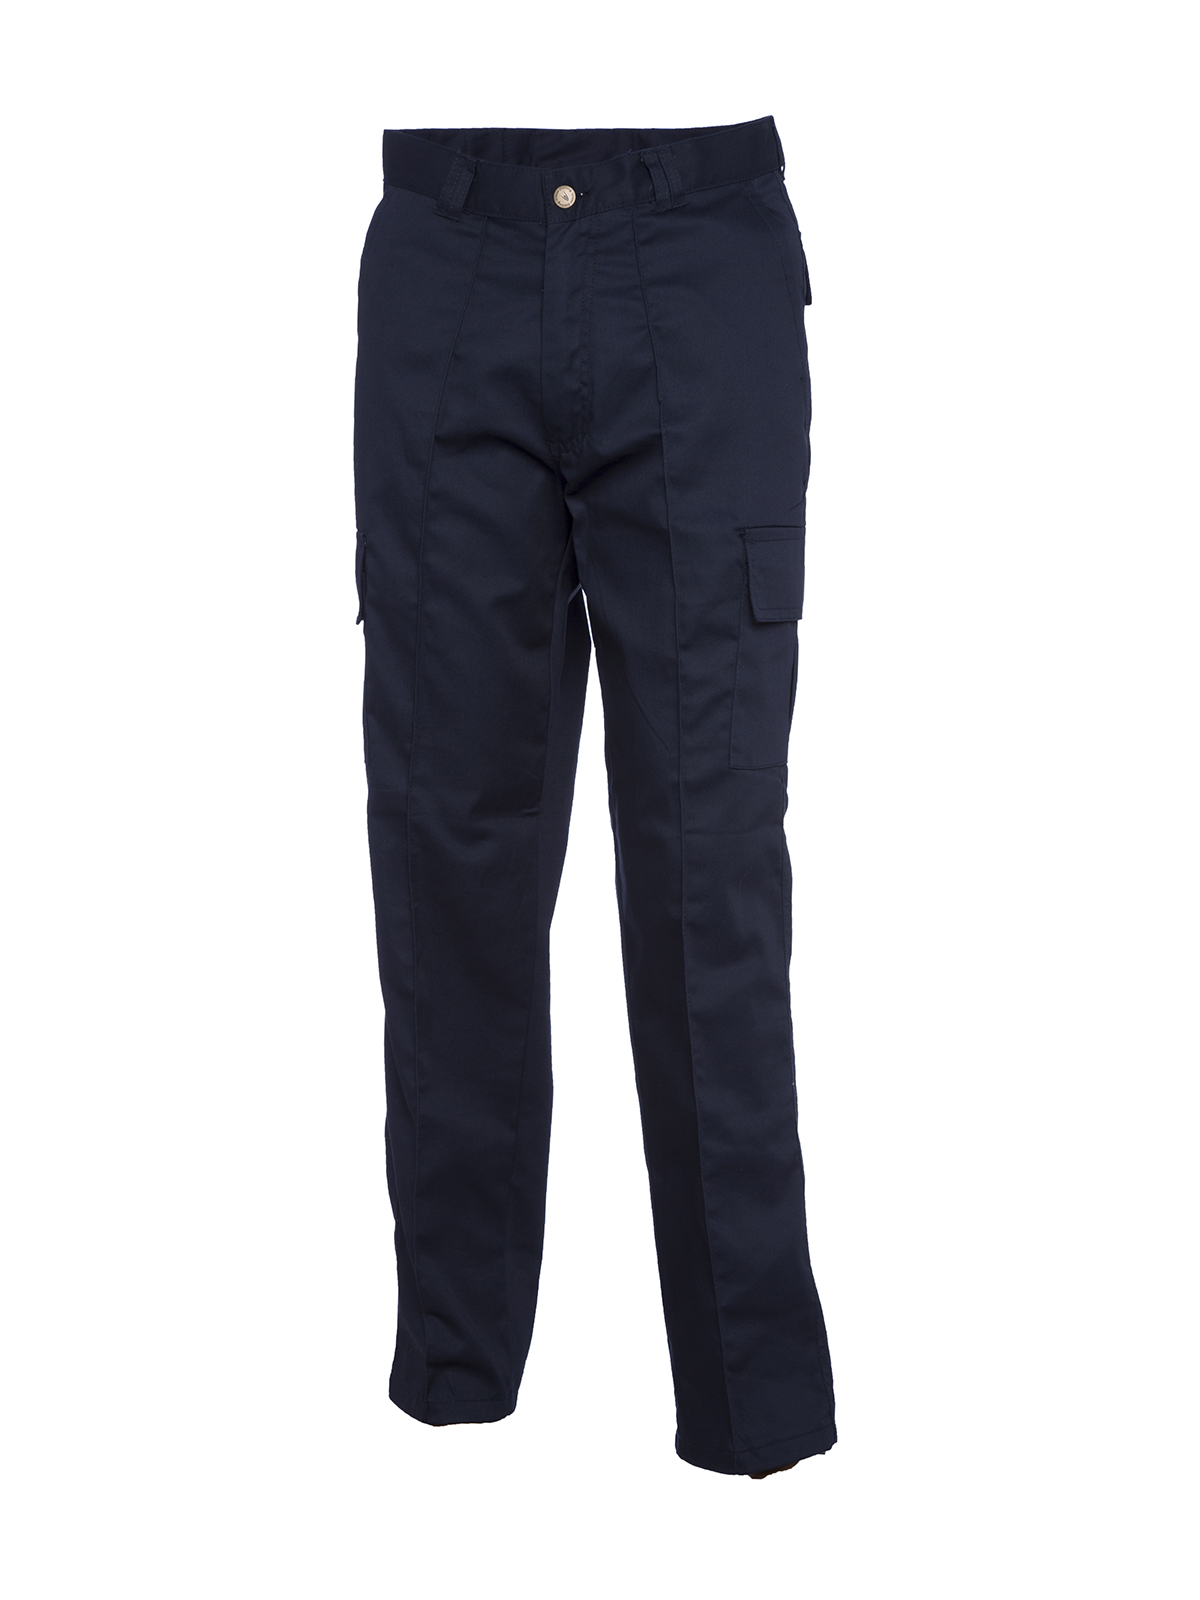 Cargo Trousers, Navy Blue - 42S